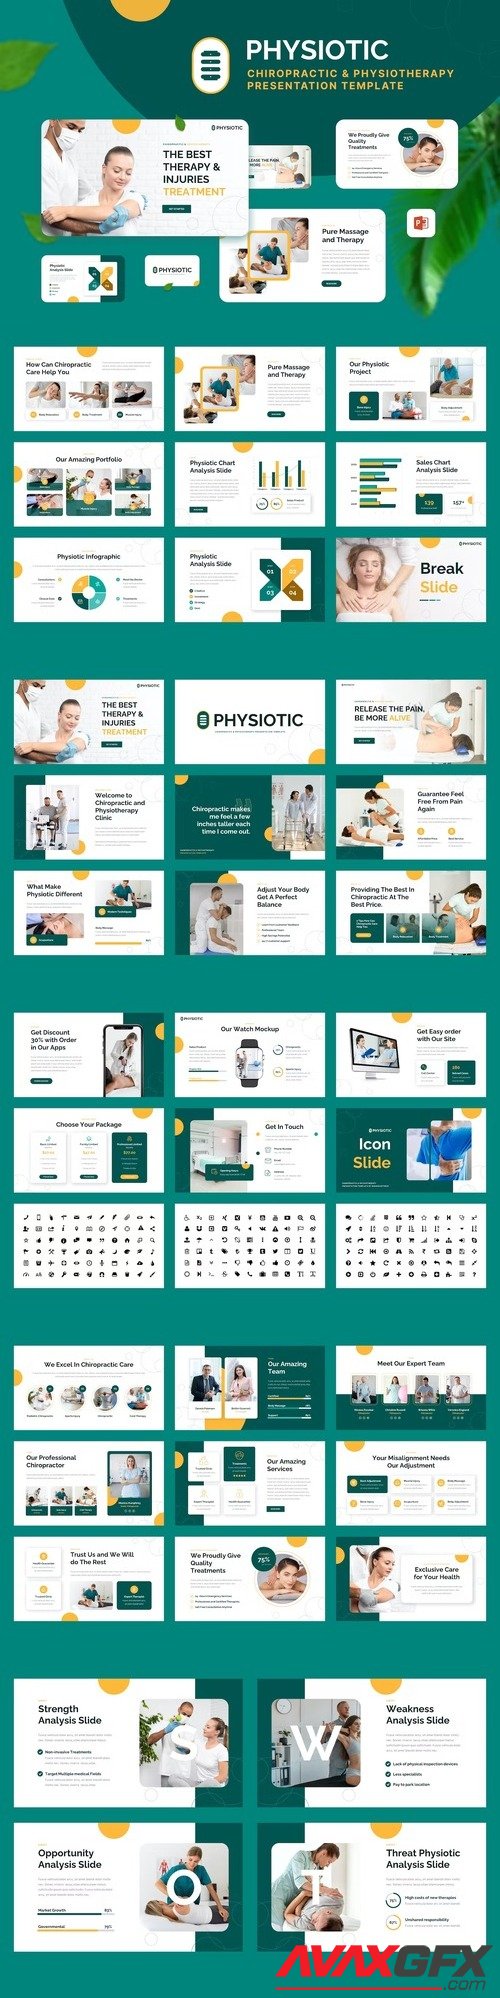 PHYSIOTIC - Chiropractic Powerpoint Template [PPTX]